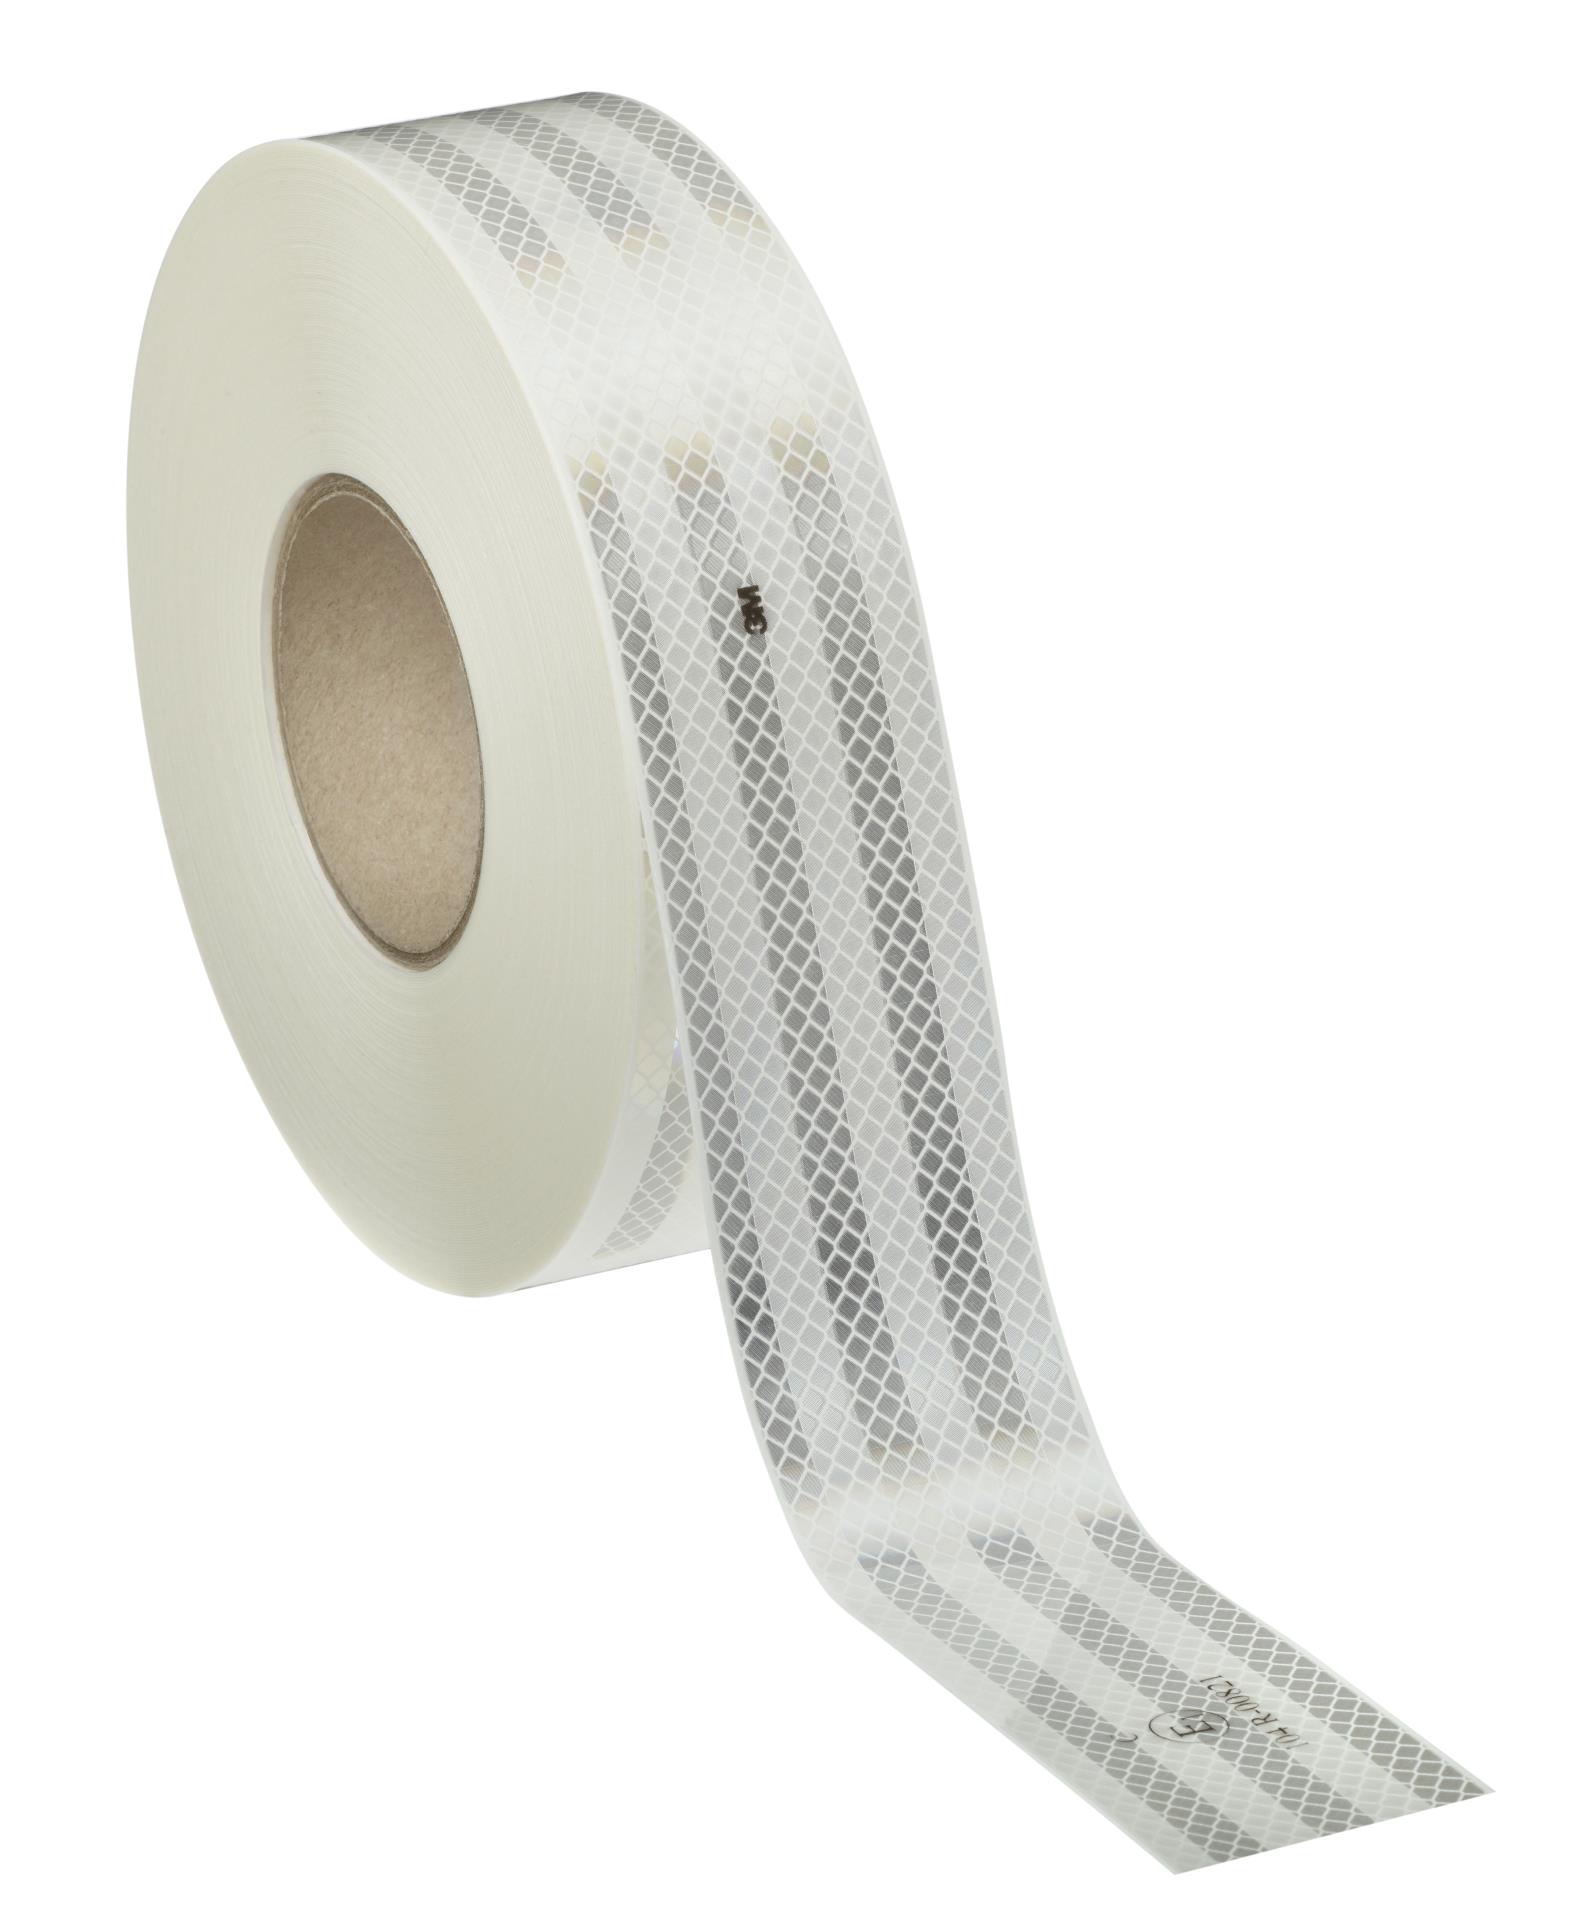 WHITE RED Reflective   Conspicuity Tape  5/8" x 50'  6-6 